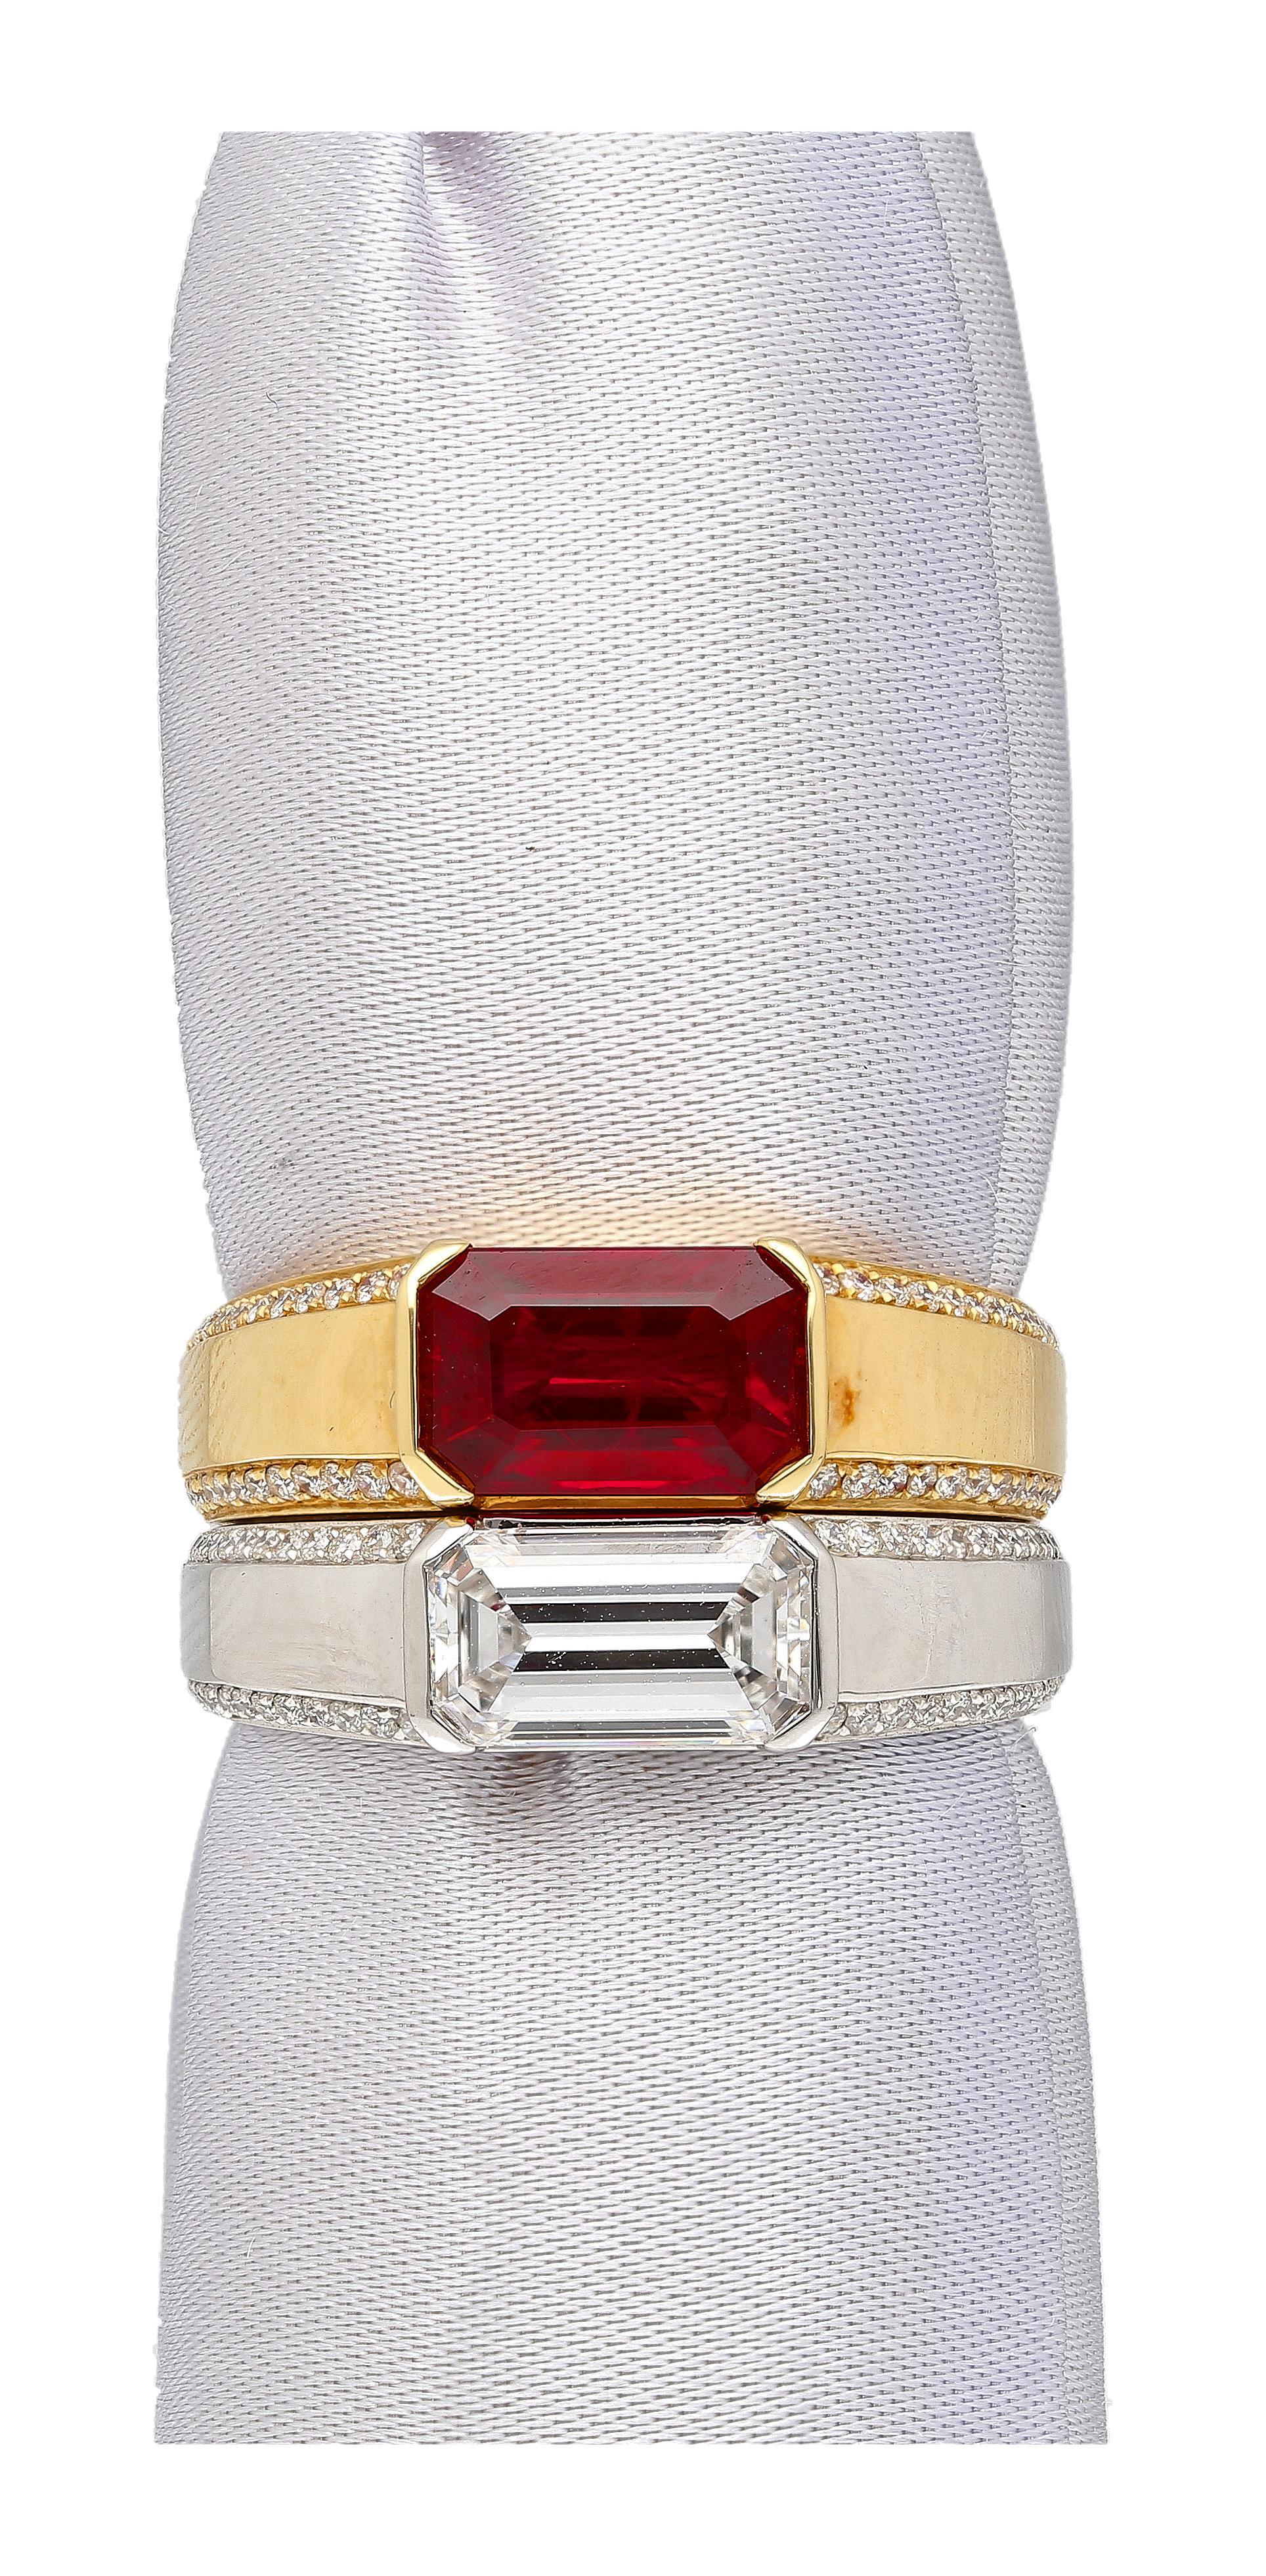 GIA Certified 1.33 Carat Emerald Cut D/VVS2 Diamond East West Band Ring For Sale 2